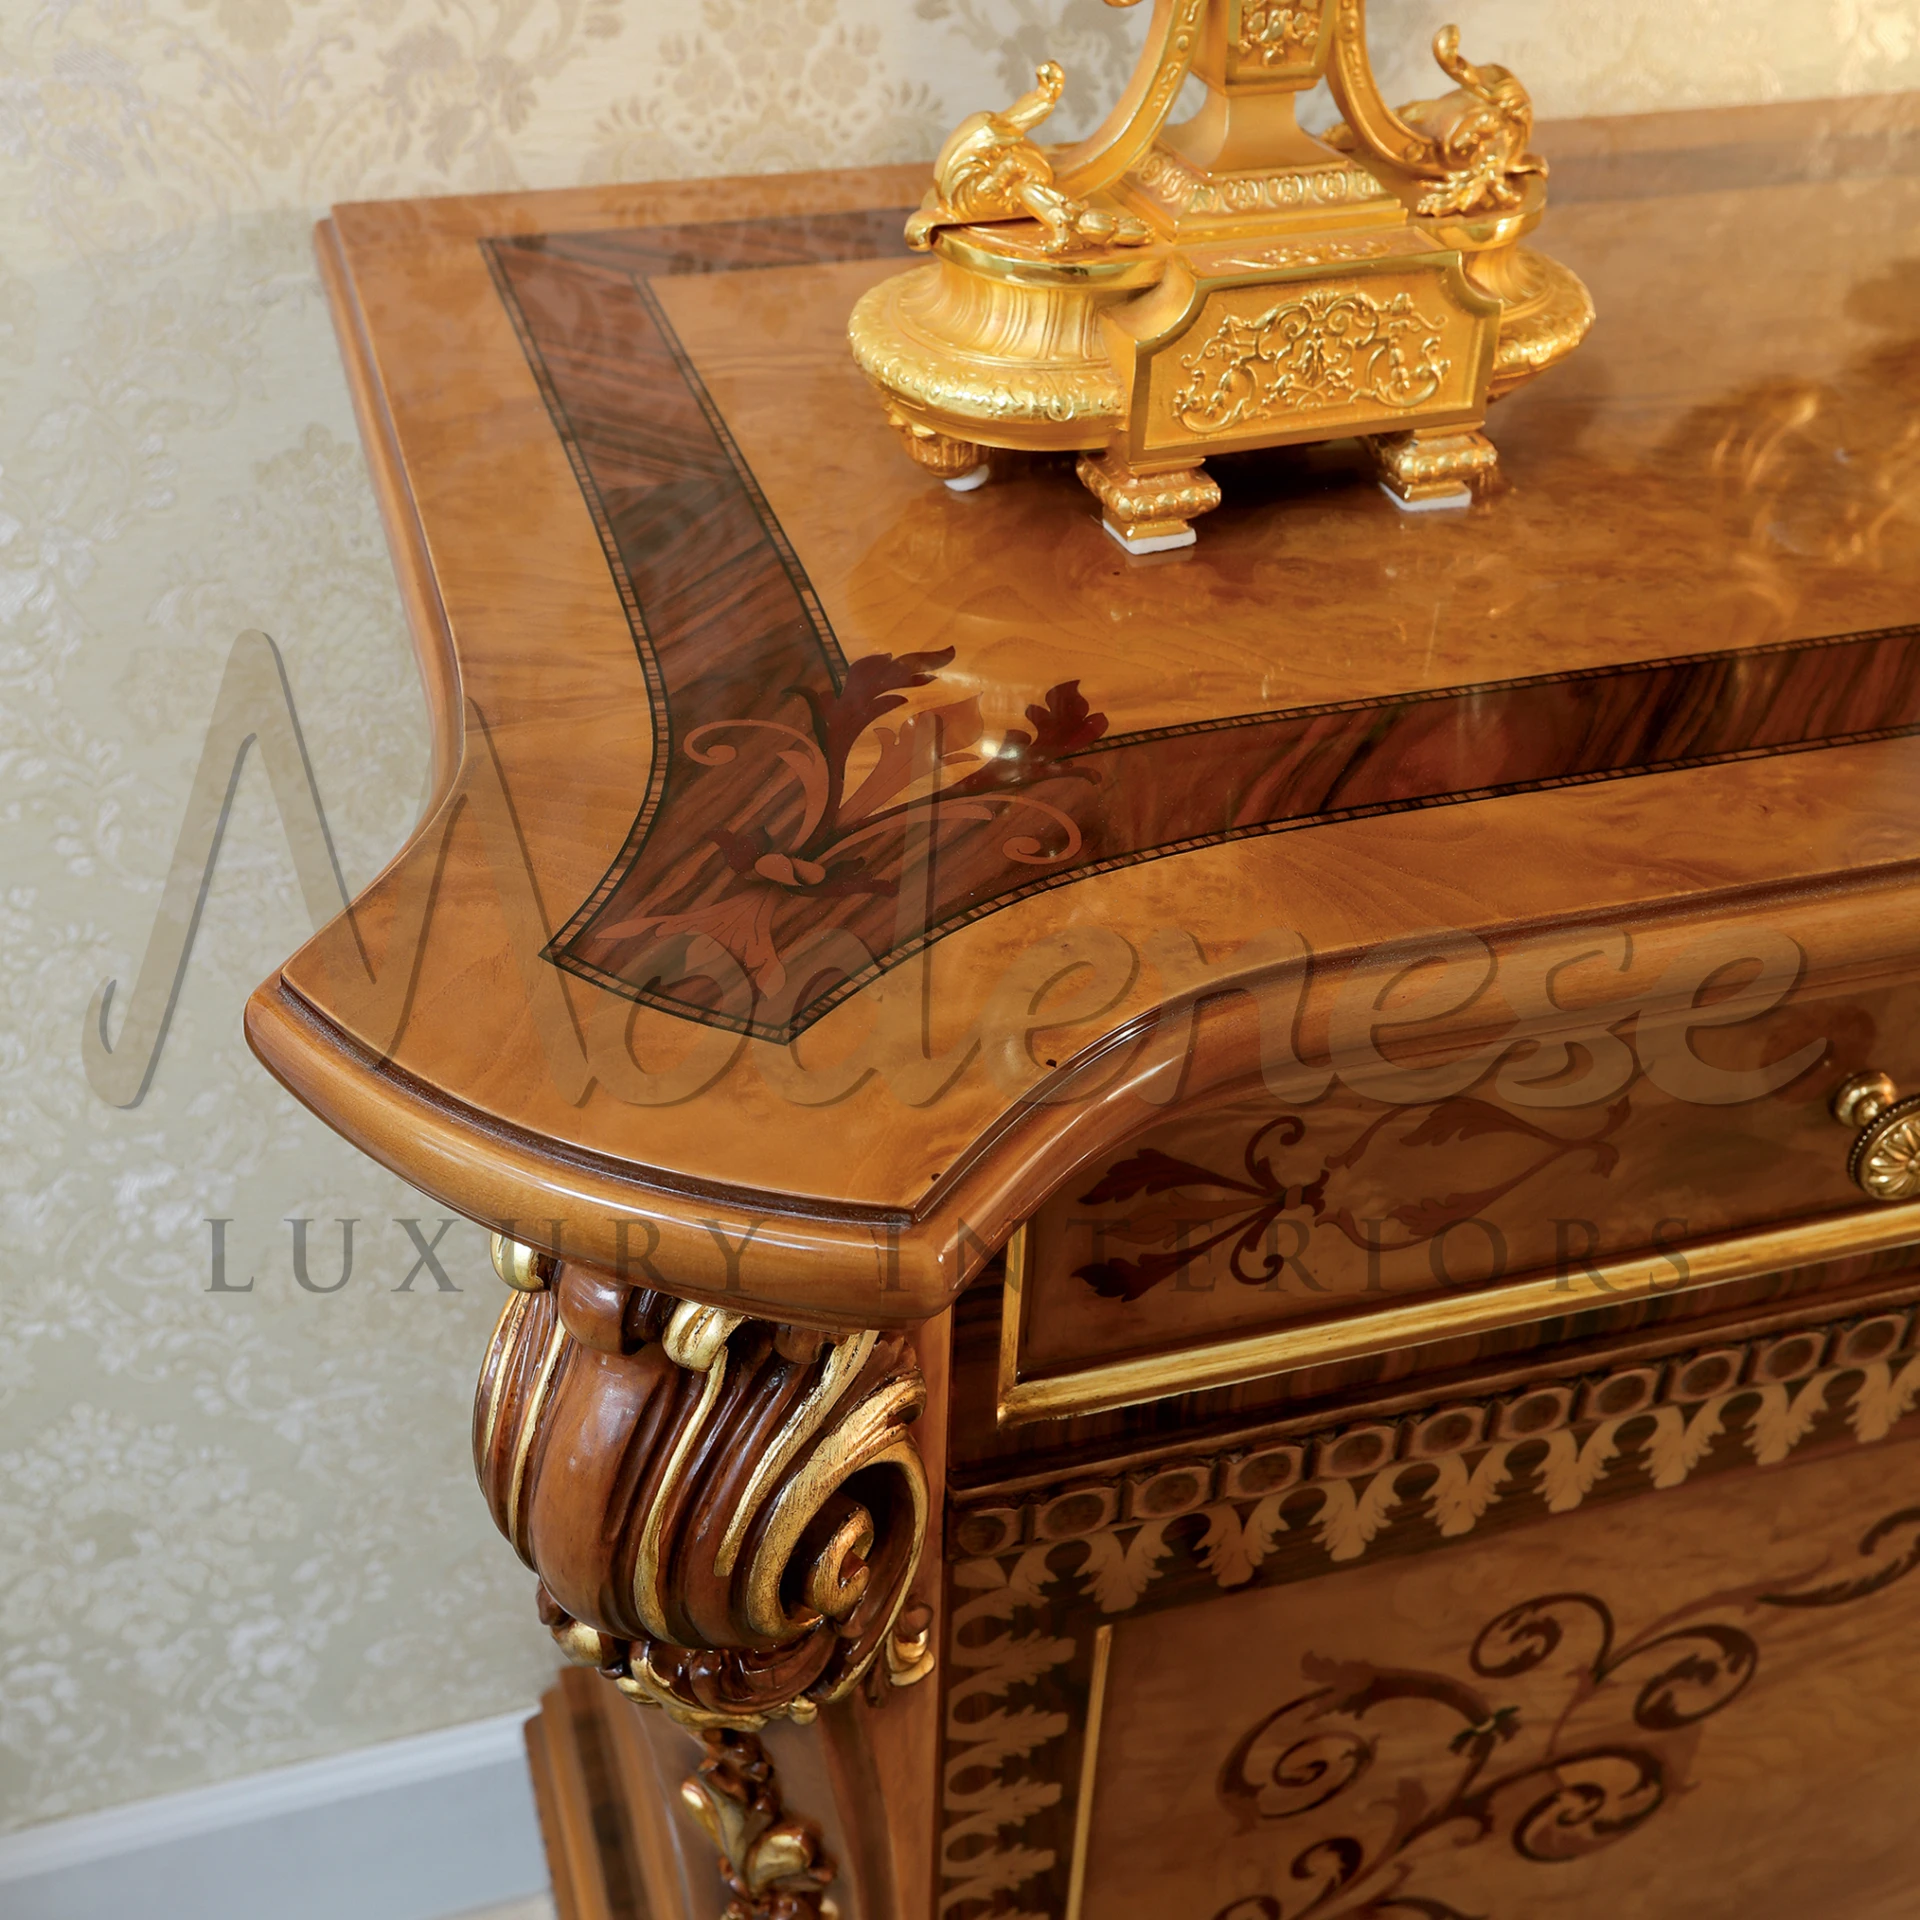 A close-up view of a Italian classic sideboard wooden cabinet with complex golden designs and a decorative golden object on top